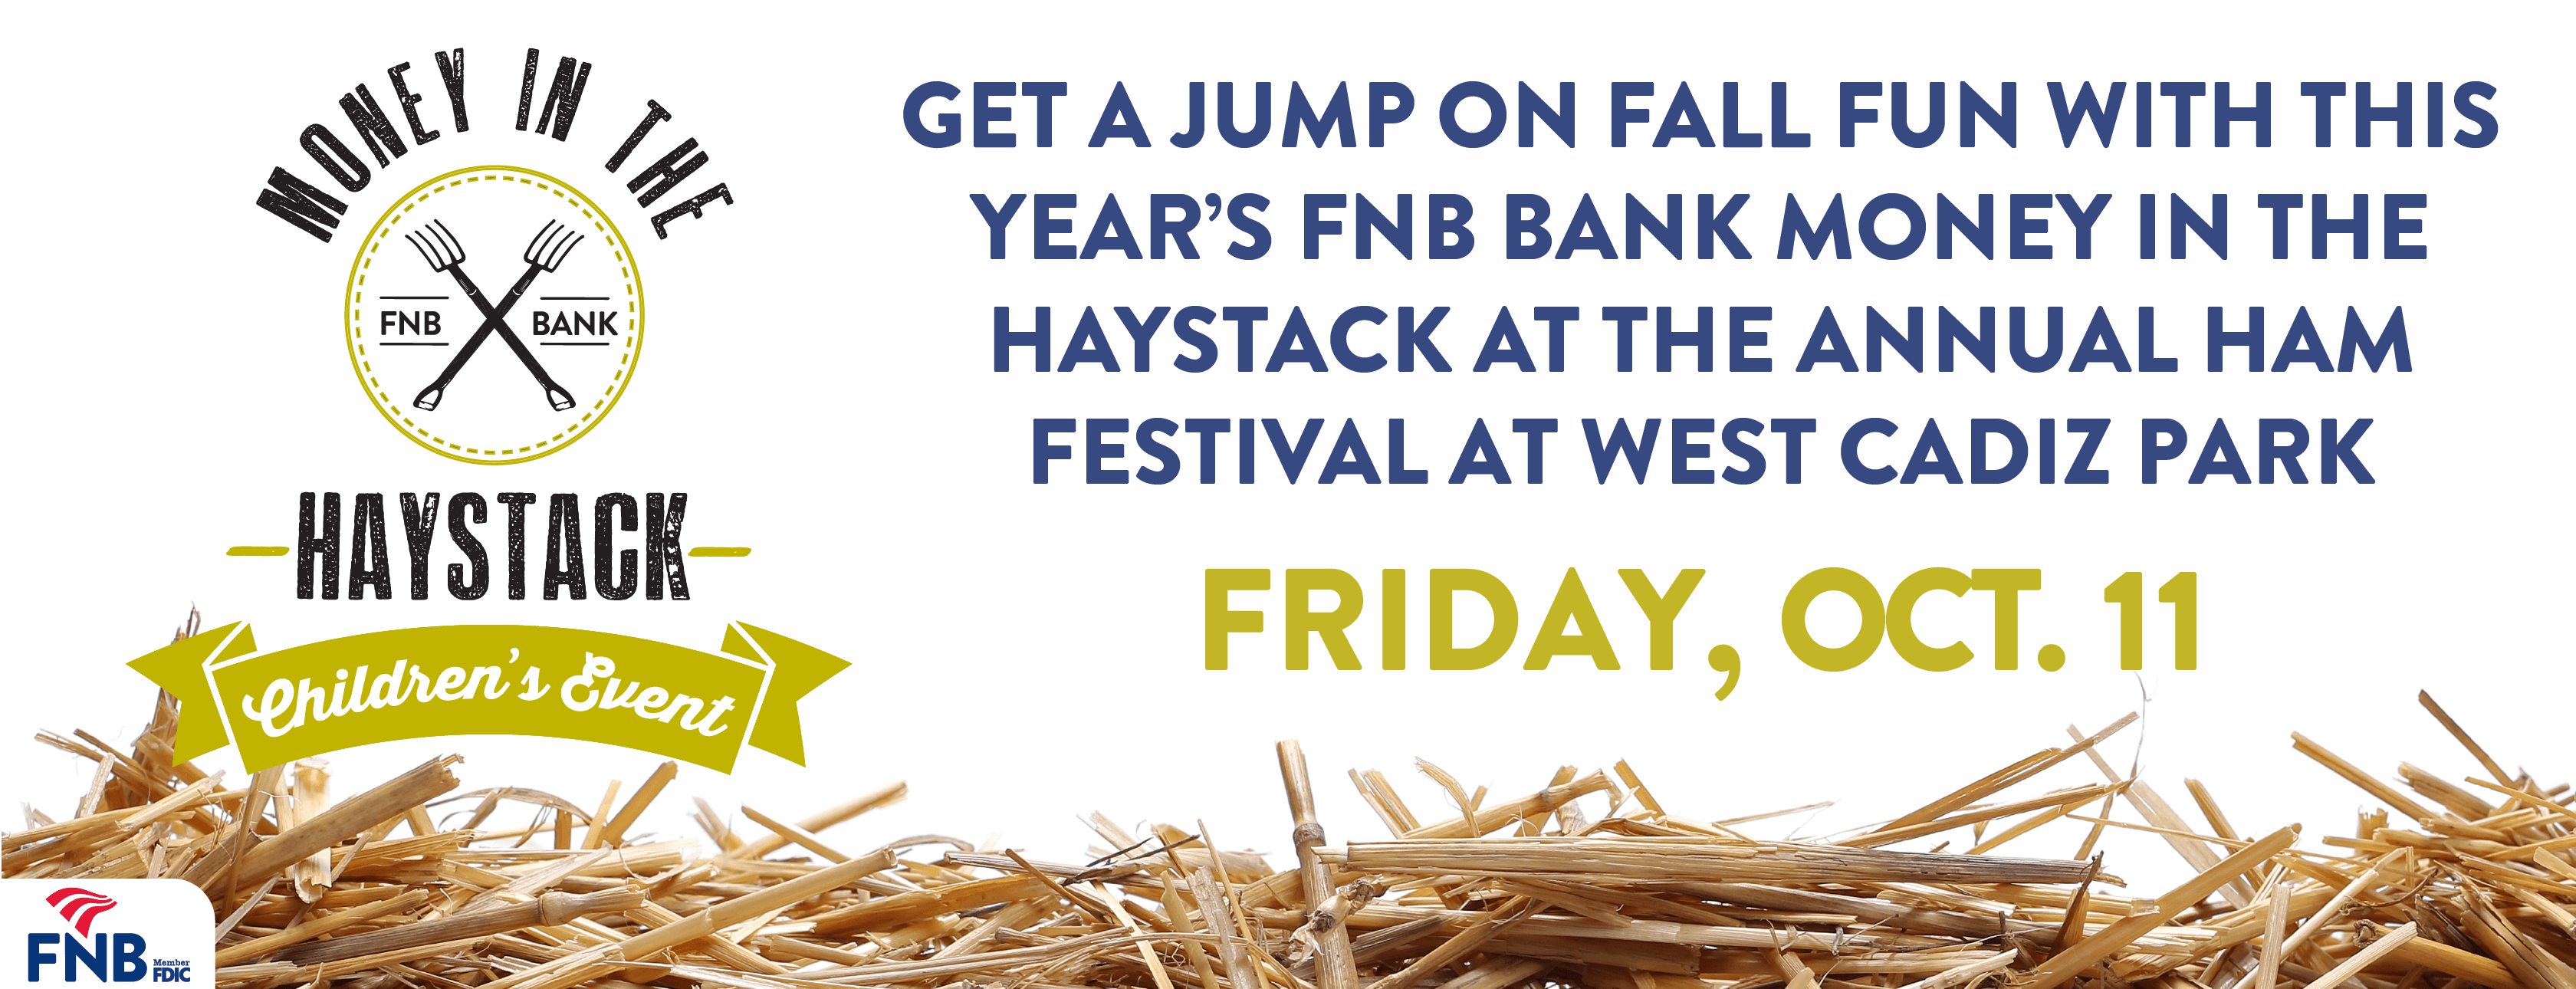 FNB Money in the Haystack Event at Ham Festival